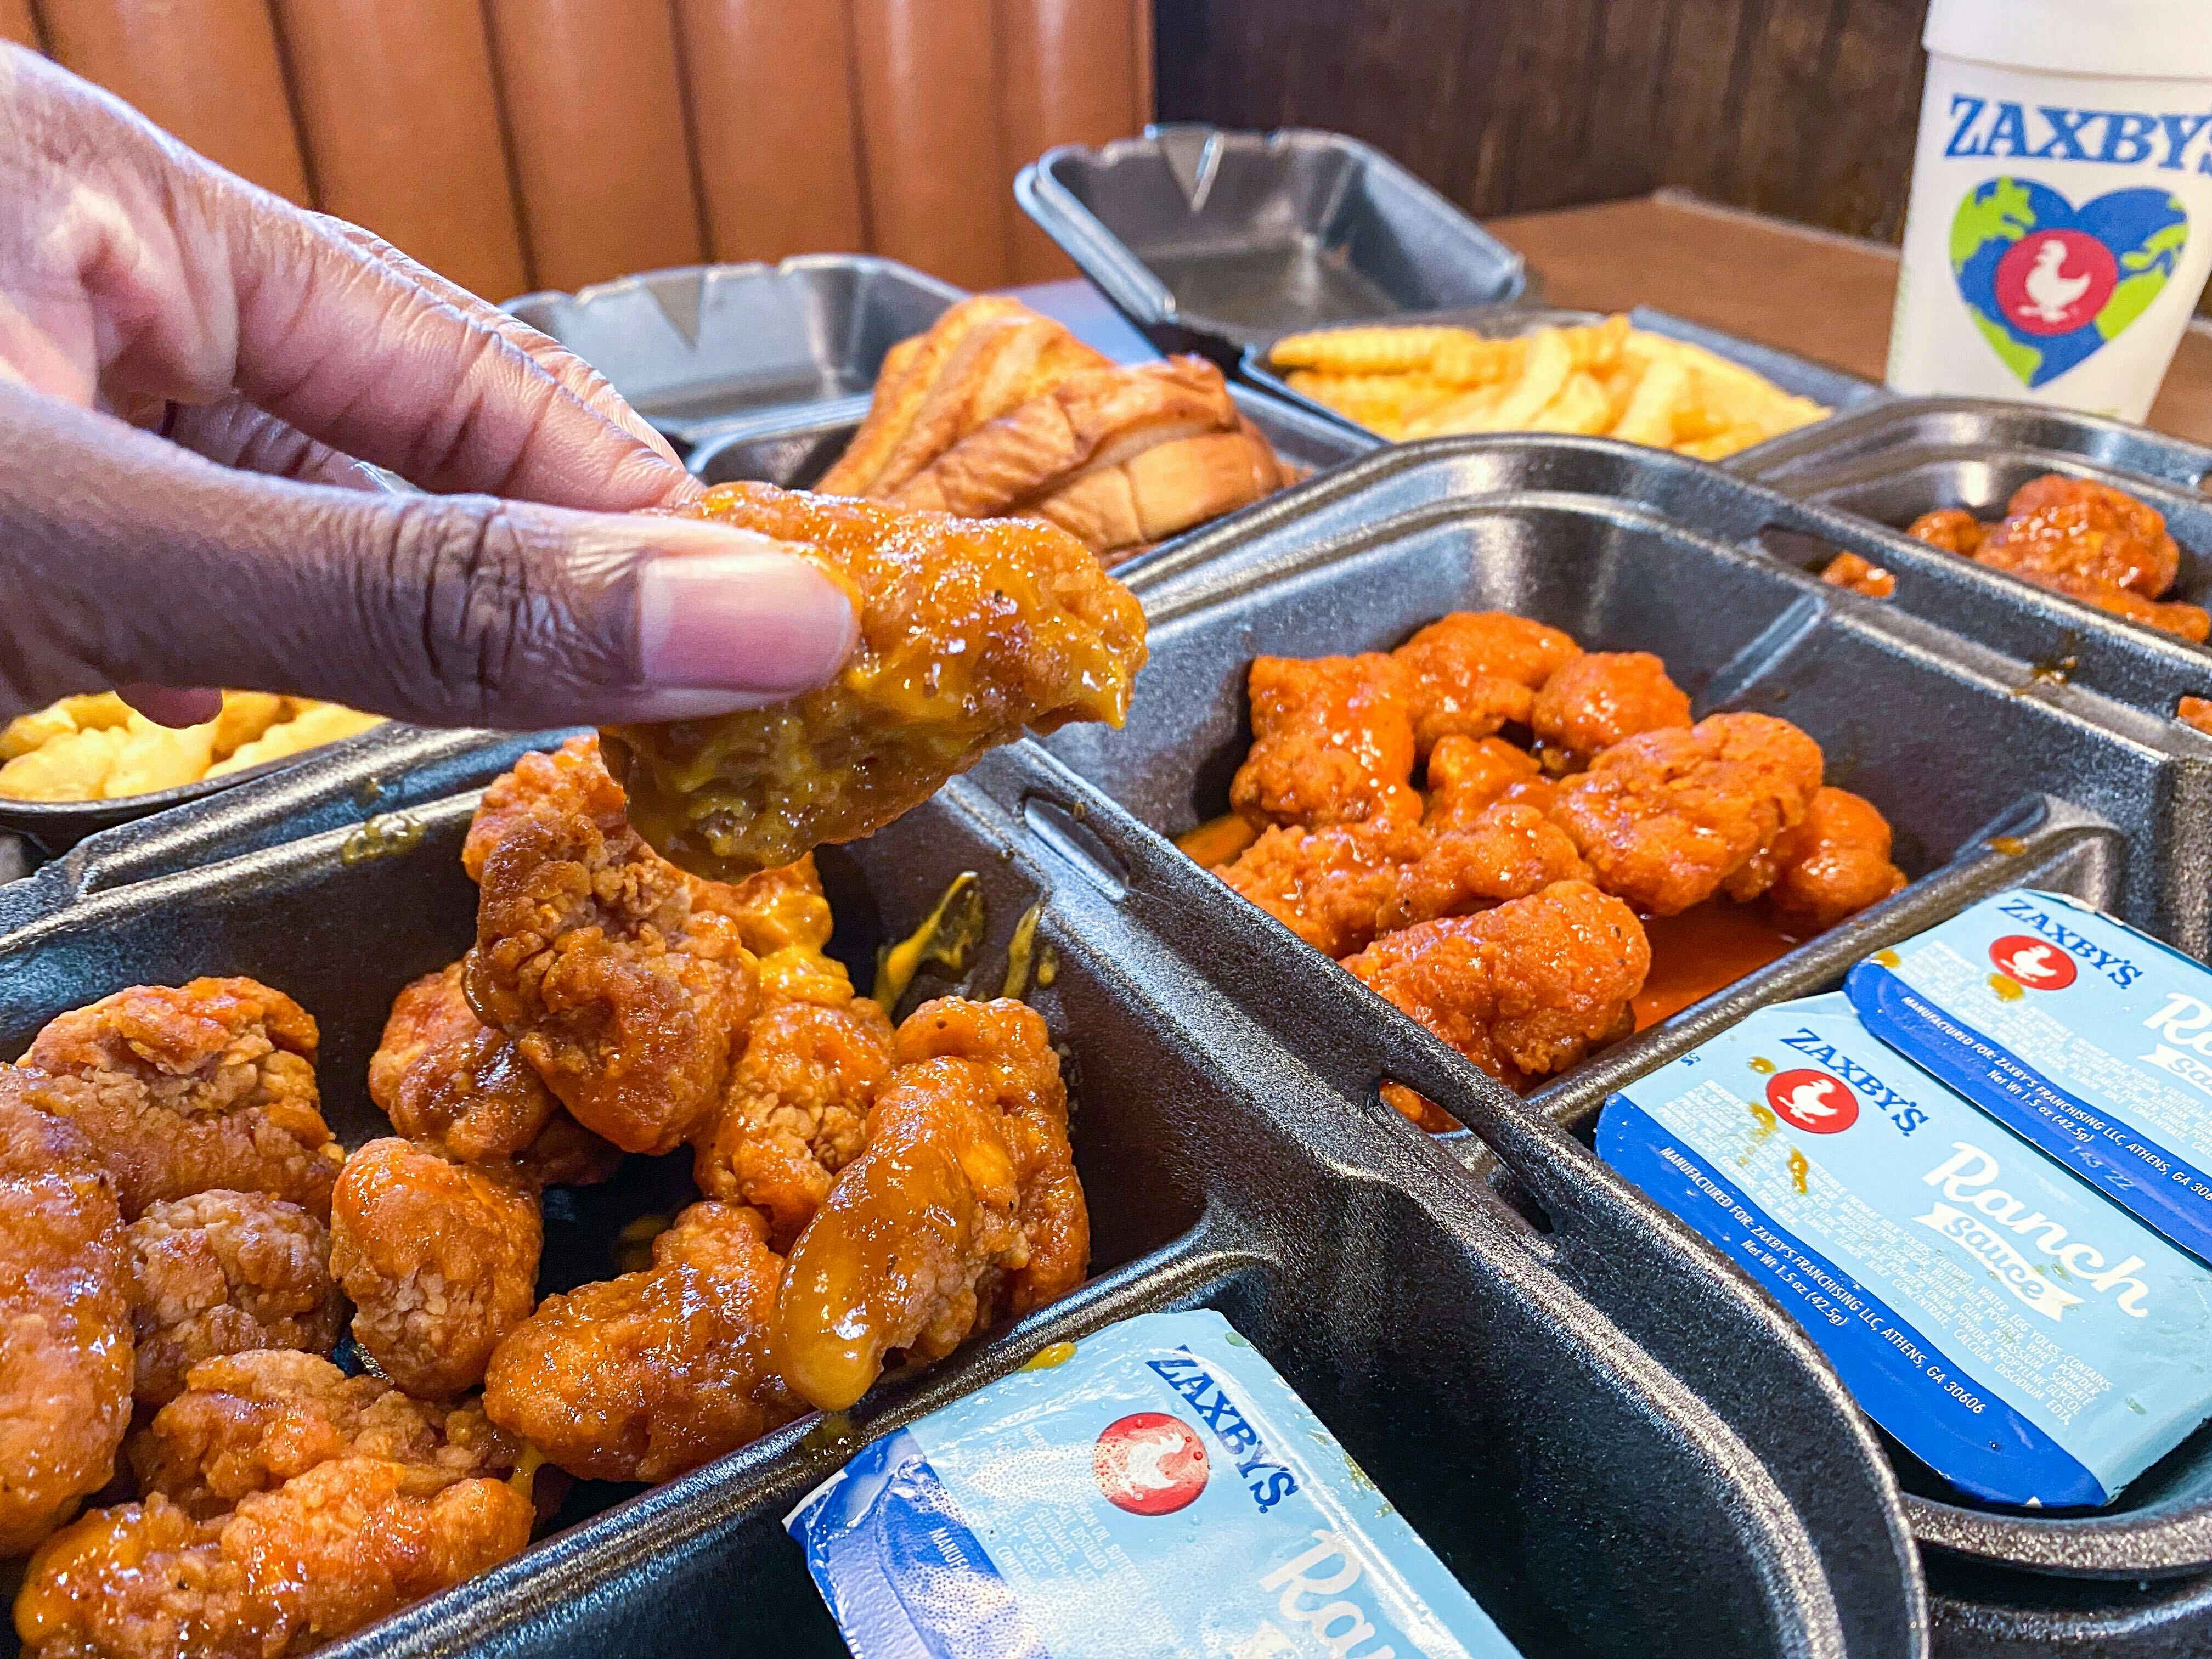 A person's hand taking a piece of chicken out of a box of chicken wings on a table at Zaxby's.